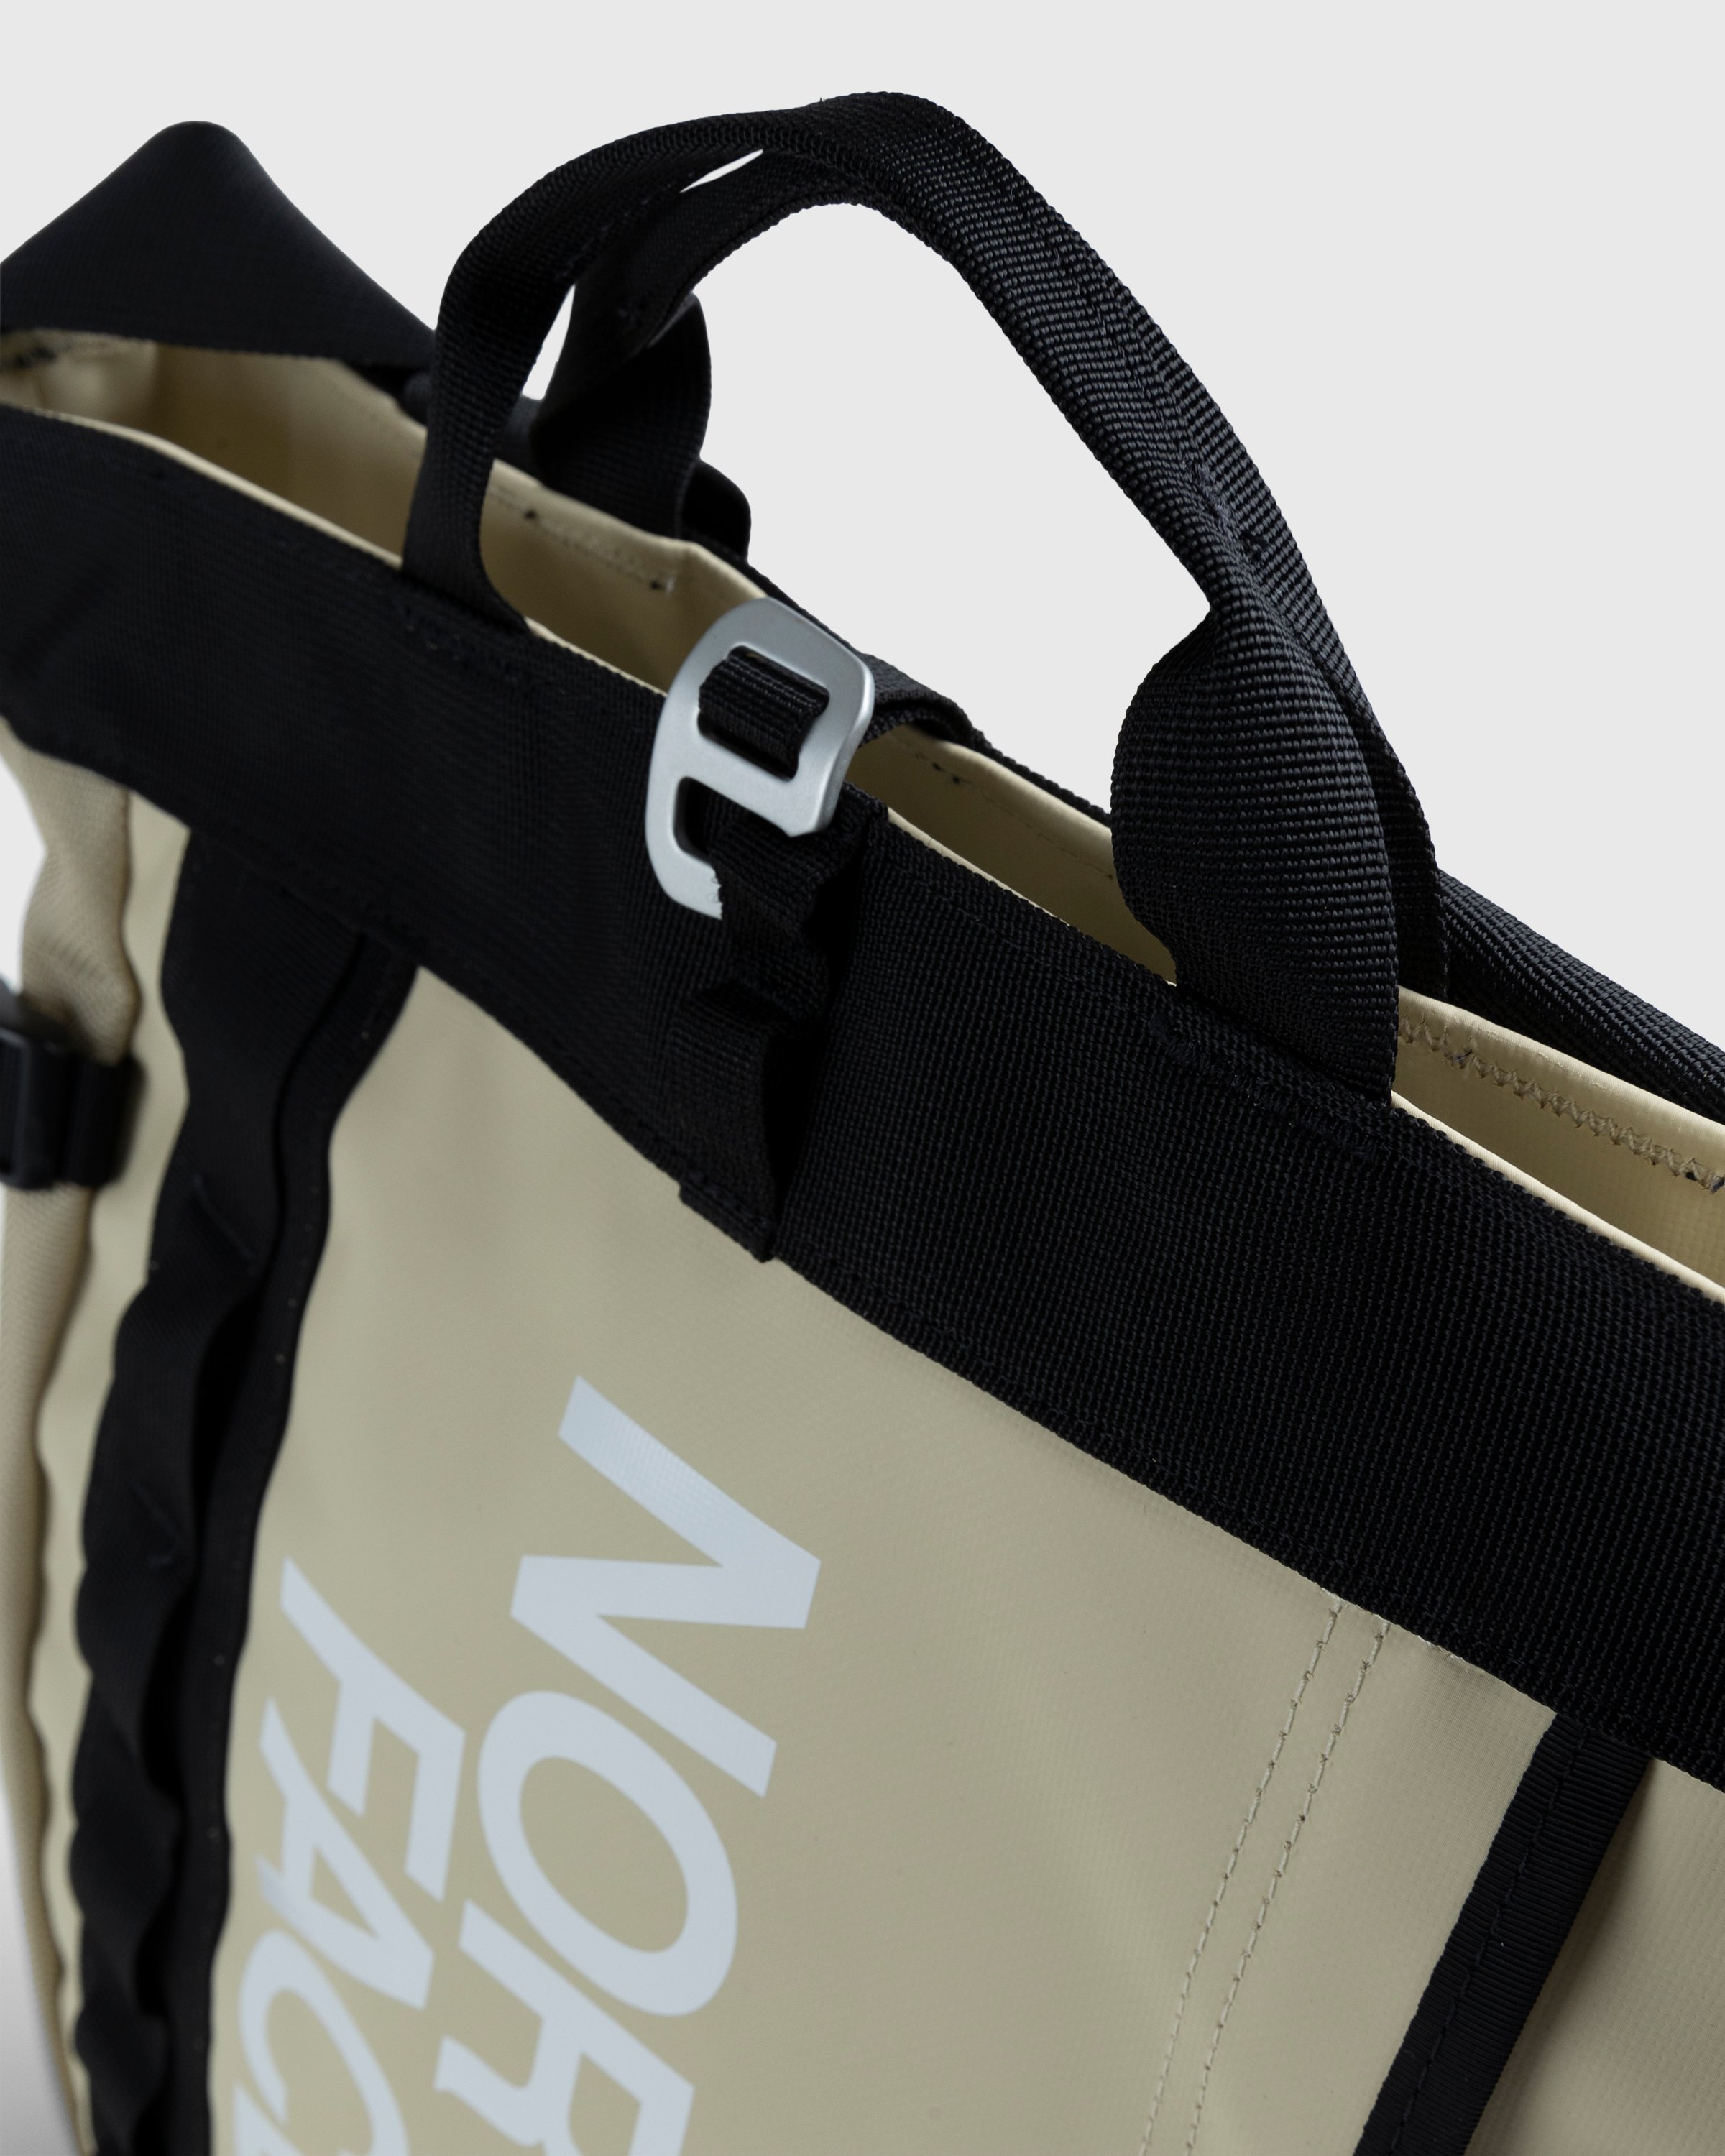 The North Face - Base Camp Tote Bag Gravel/Black - Accessories - Black - Image 4